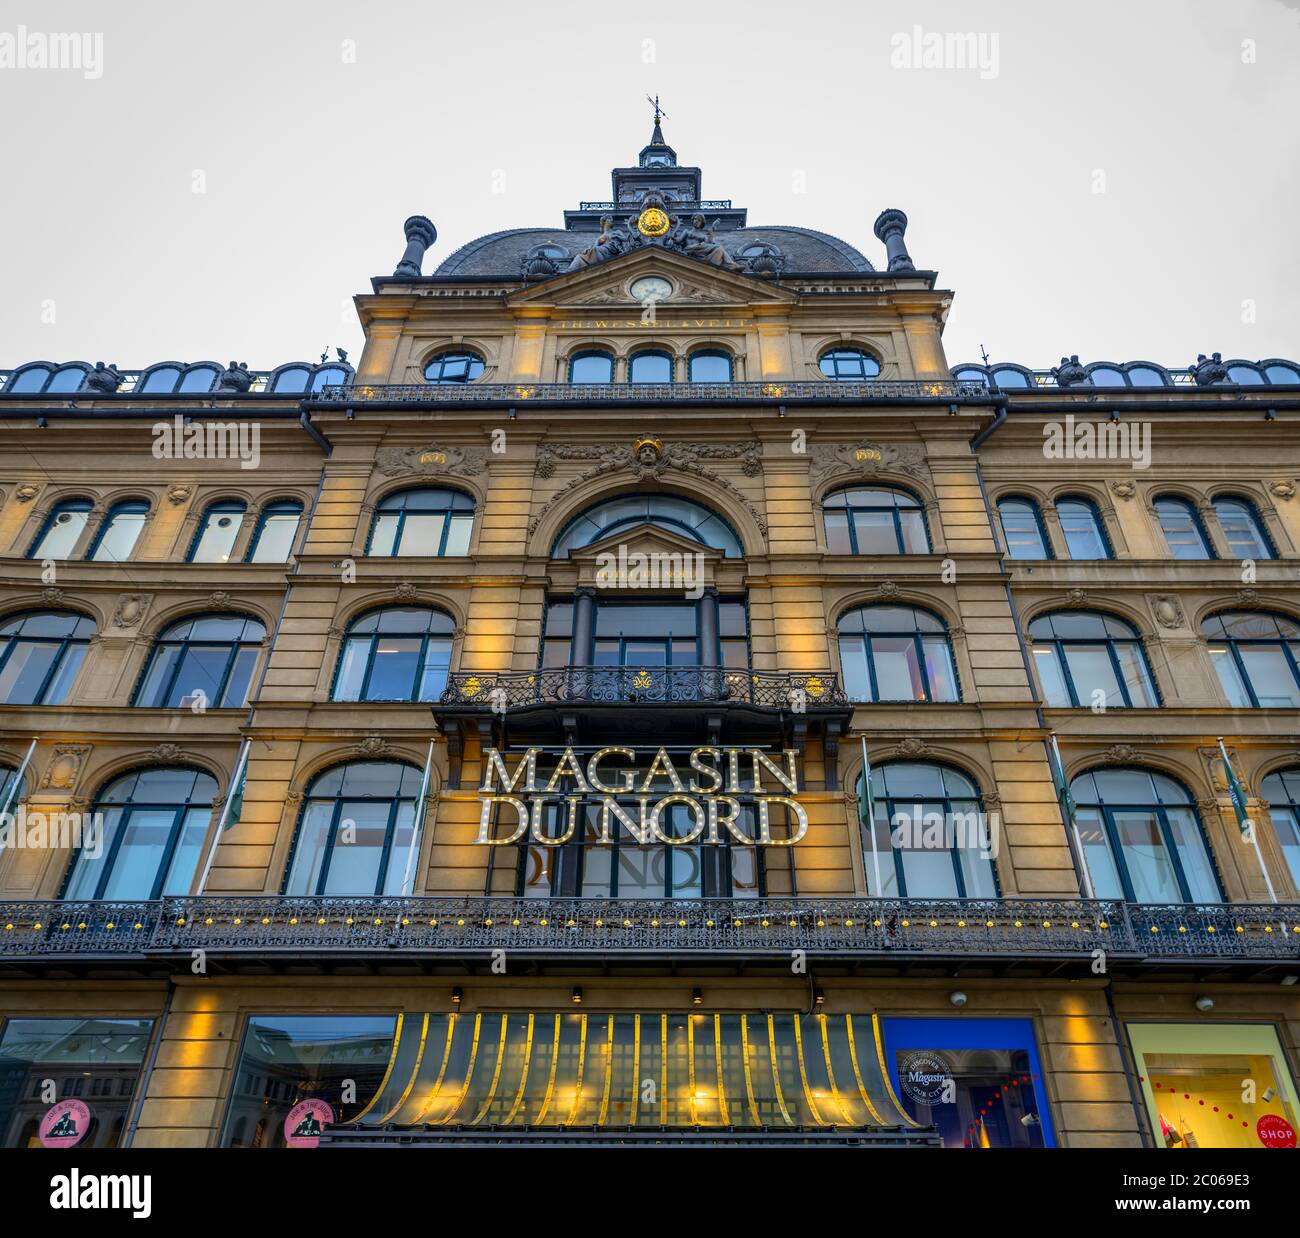 Entrance of the Magasin Du Nord, luxury department store, Copenhagen, Stock Photo - Alamy